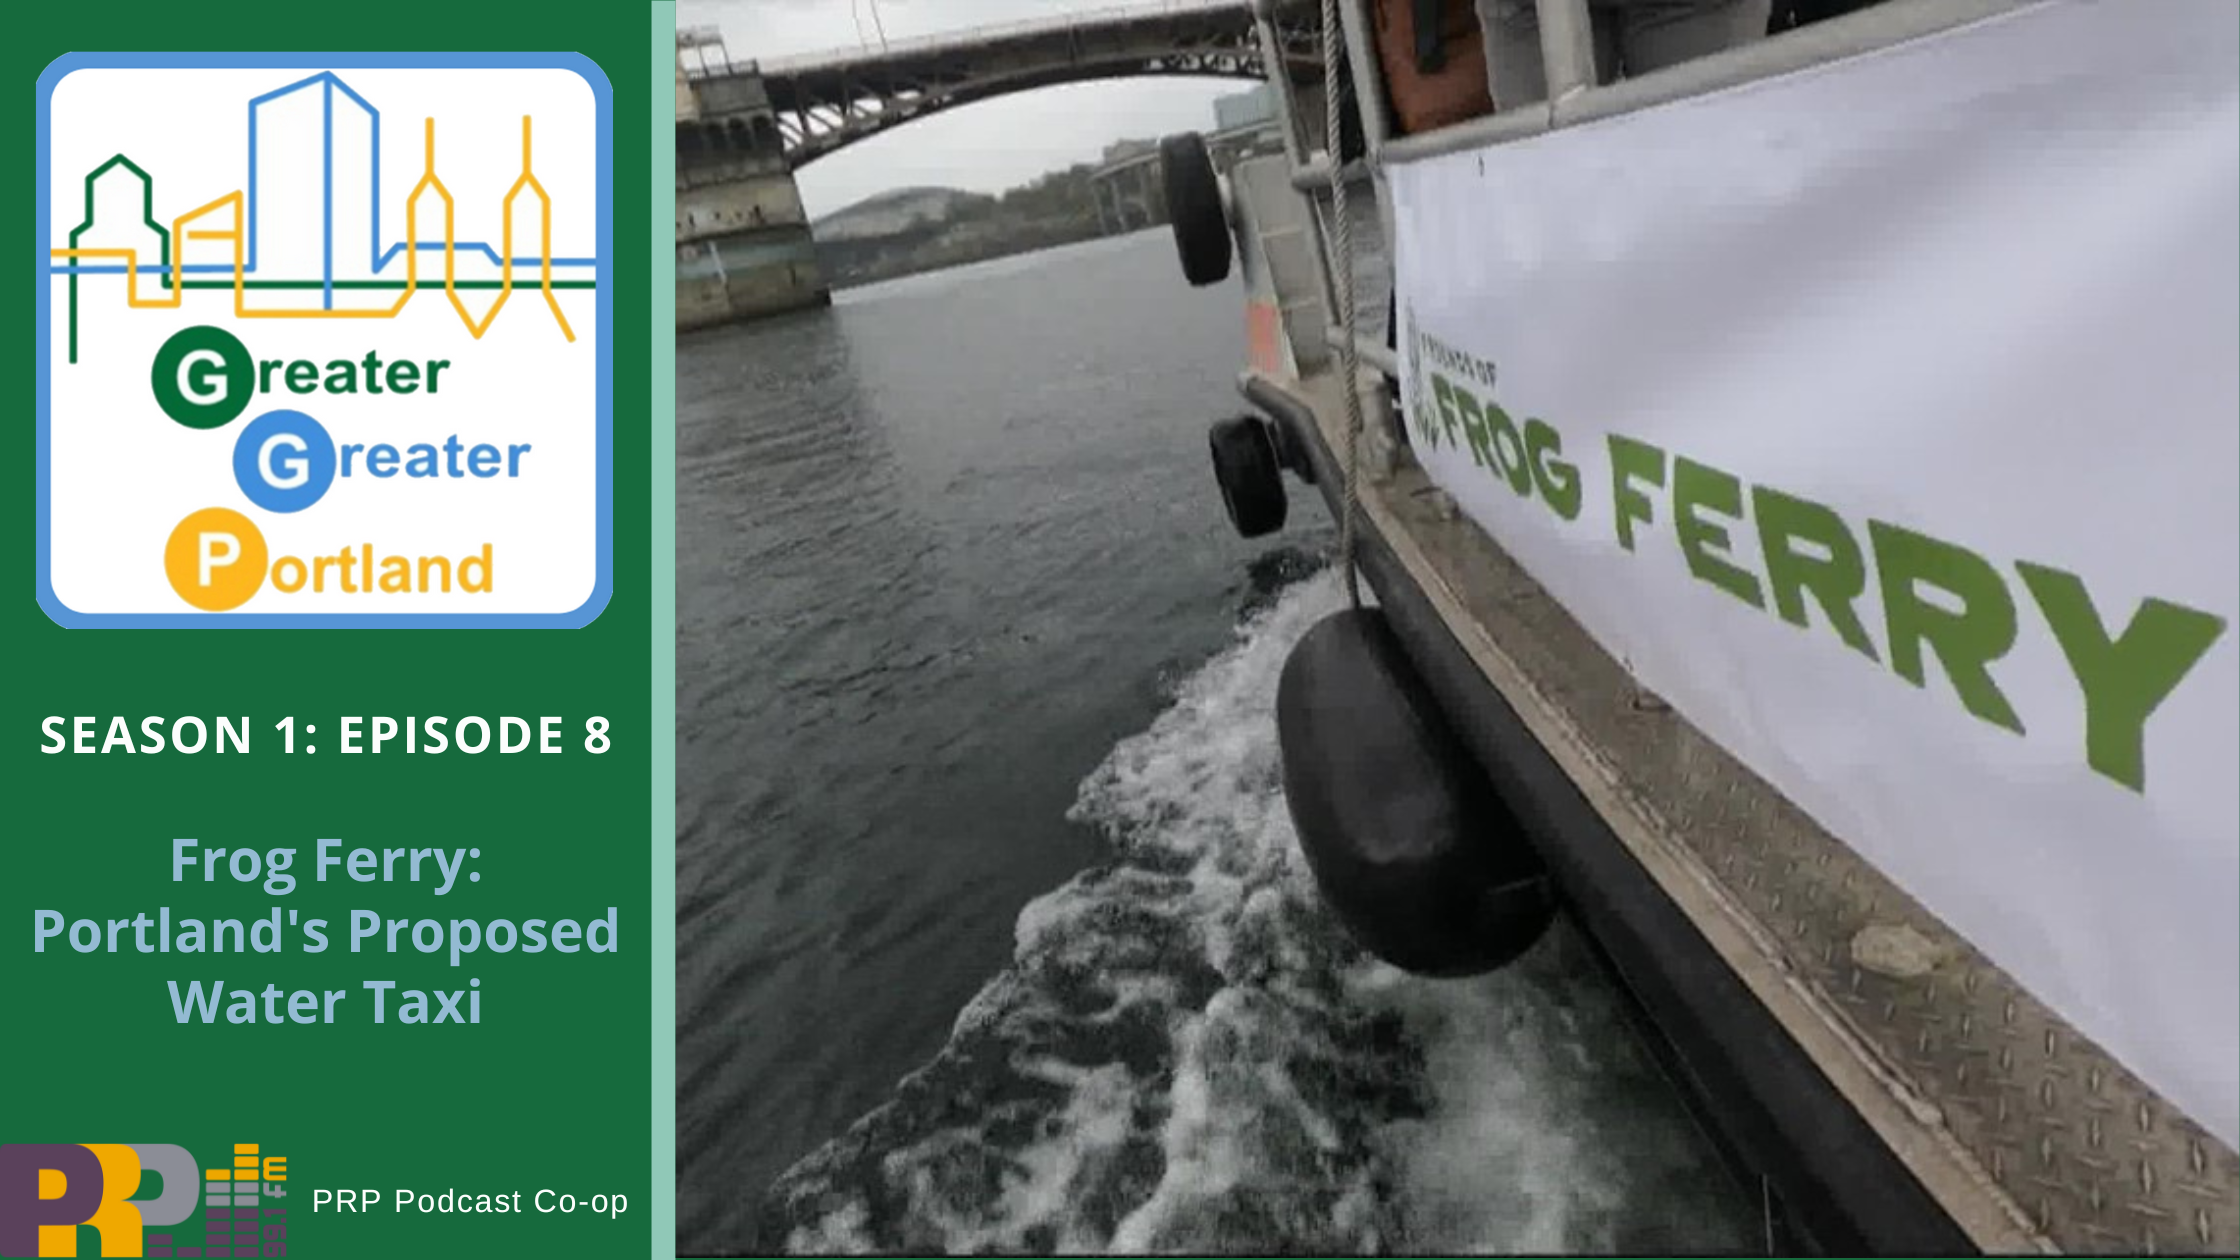 Greater Greater Portland: Frog Ferry – Portland’s Proposed Water Taxi